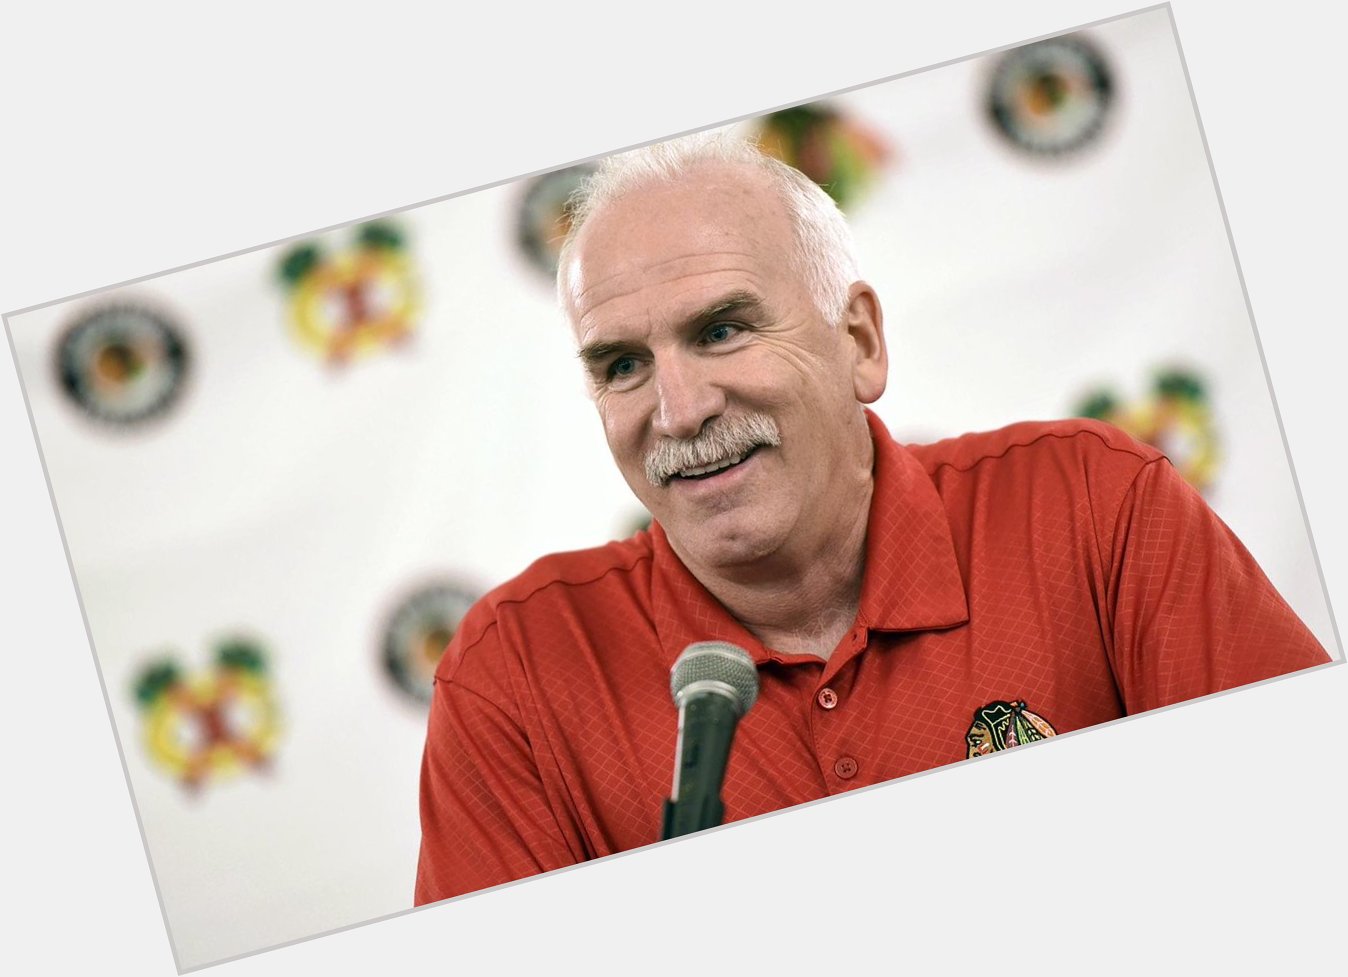 The best Blackhawks coach ever has a birthday today. 

Happy 63rd birthday to Joel Quenneville! 